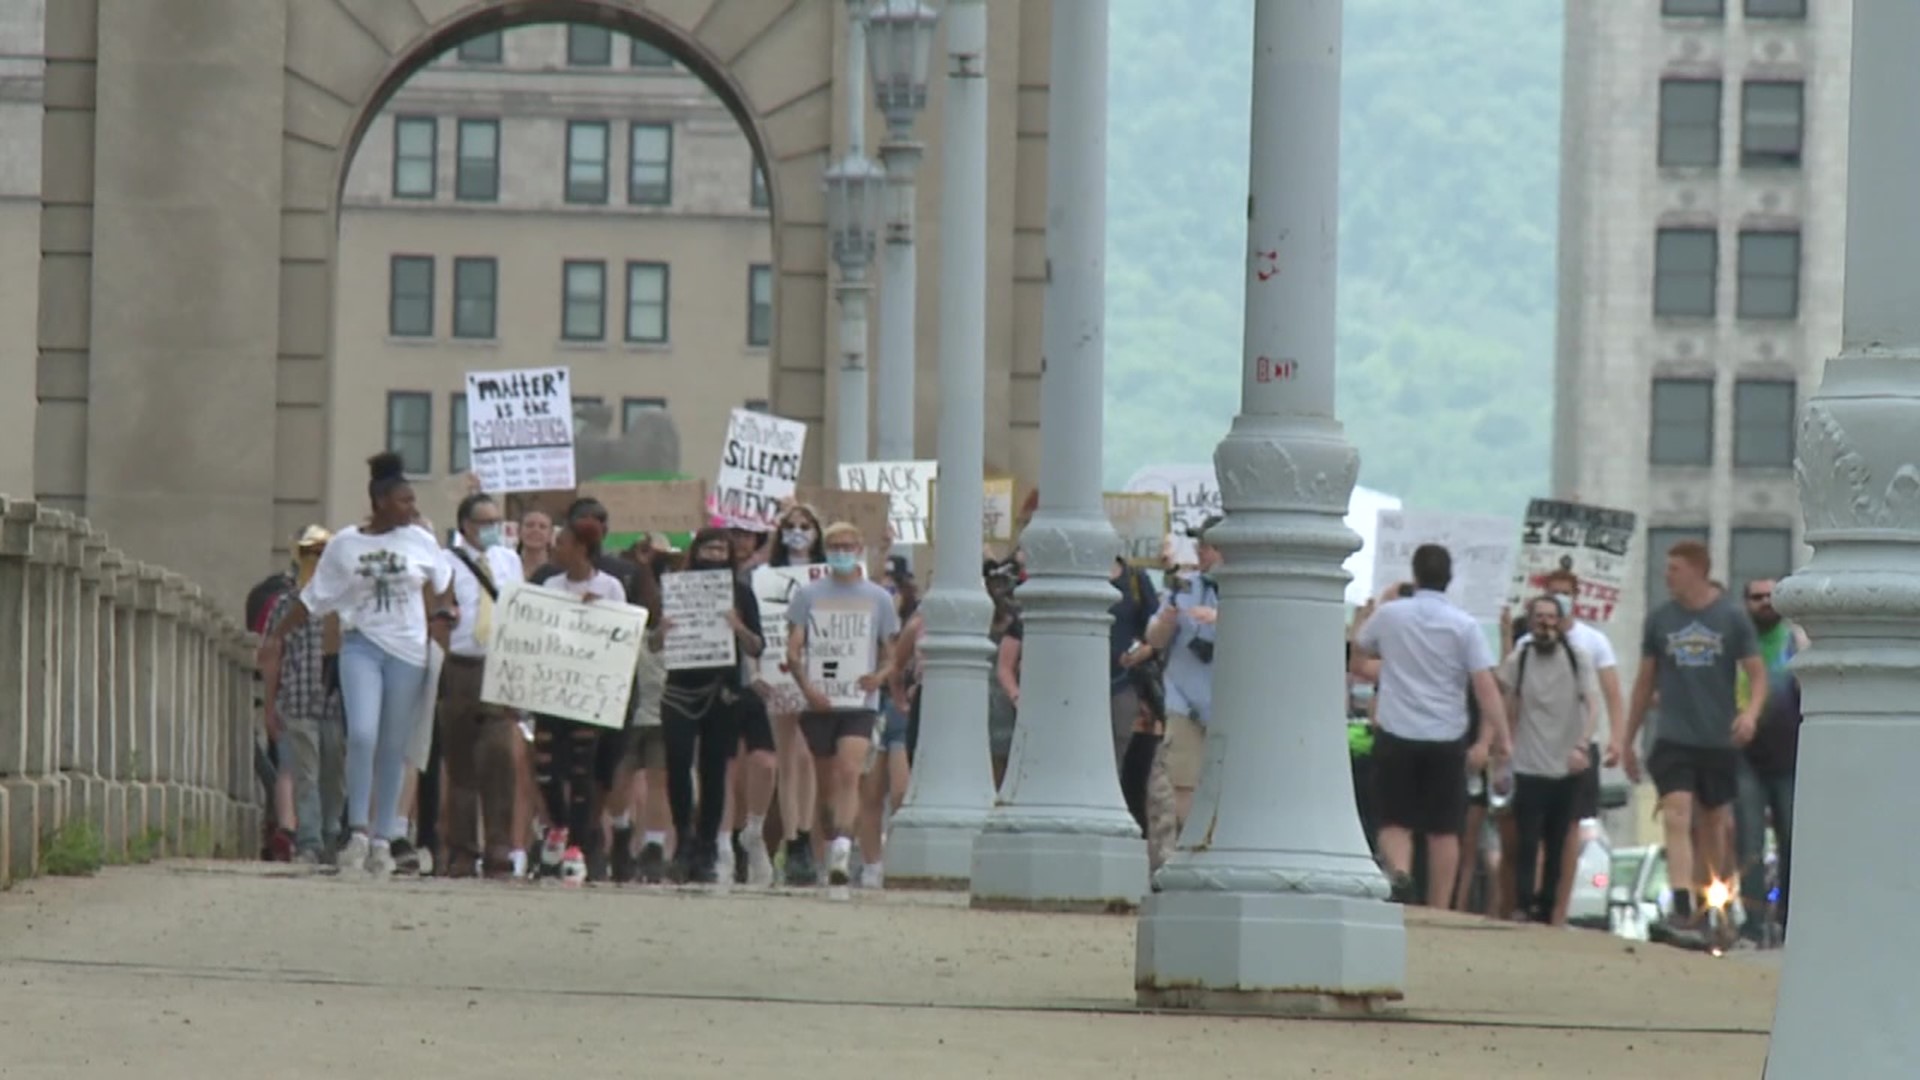 Demonstrations for the Black Lives Matter movement continued in our area as people marched in Luzerne County to spread their message against racial injustice.